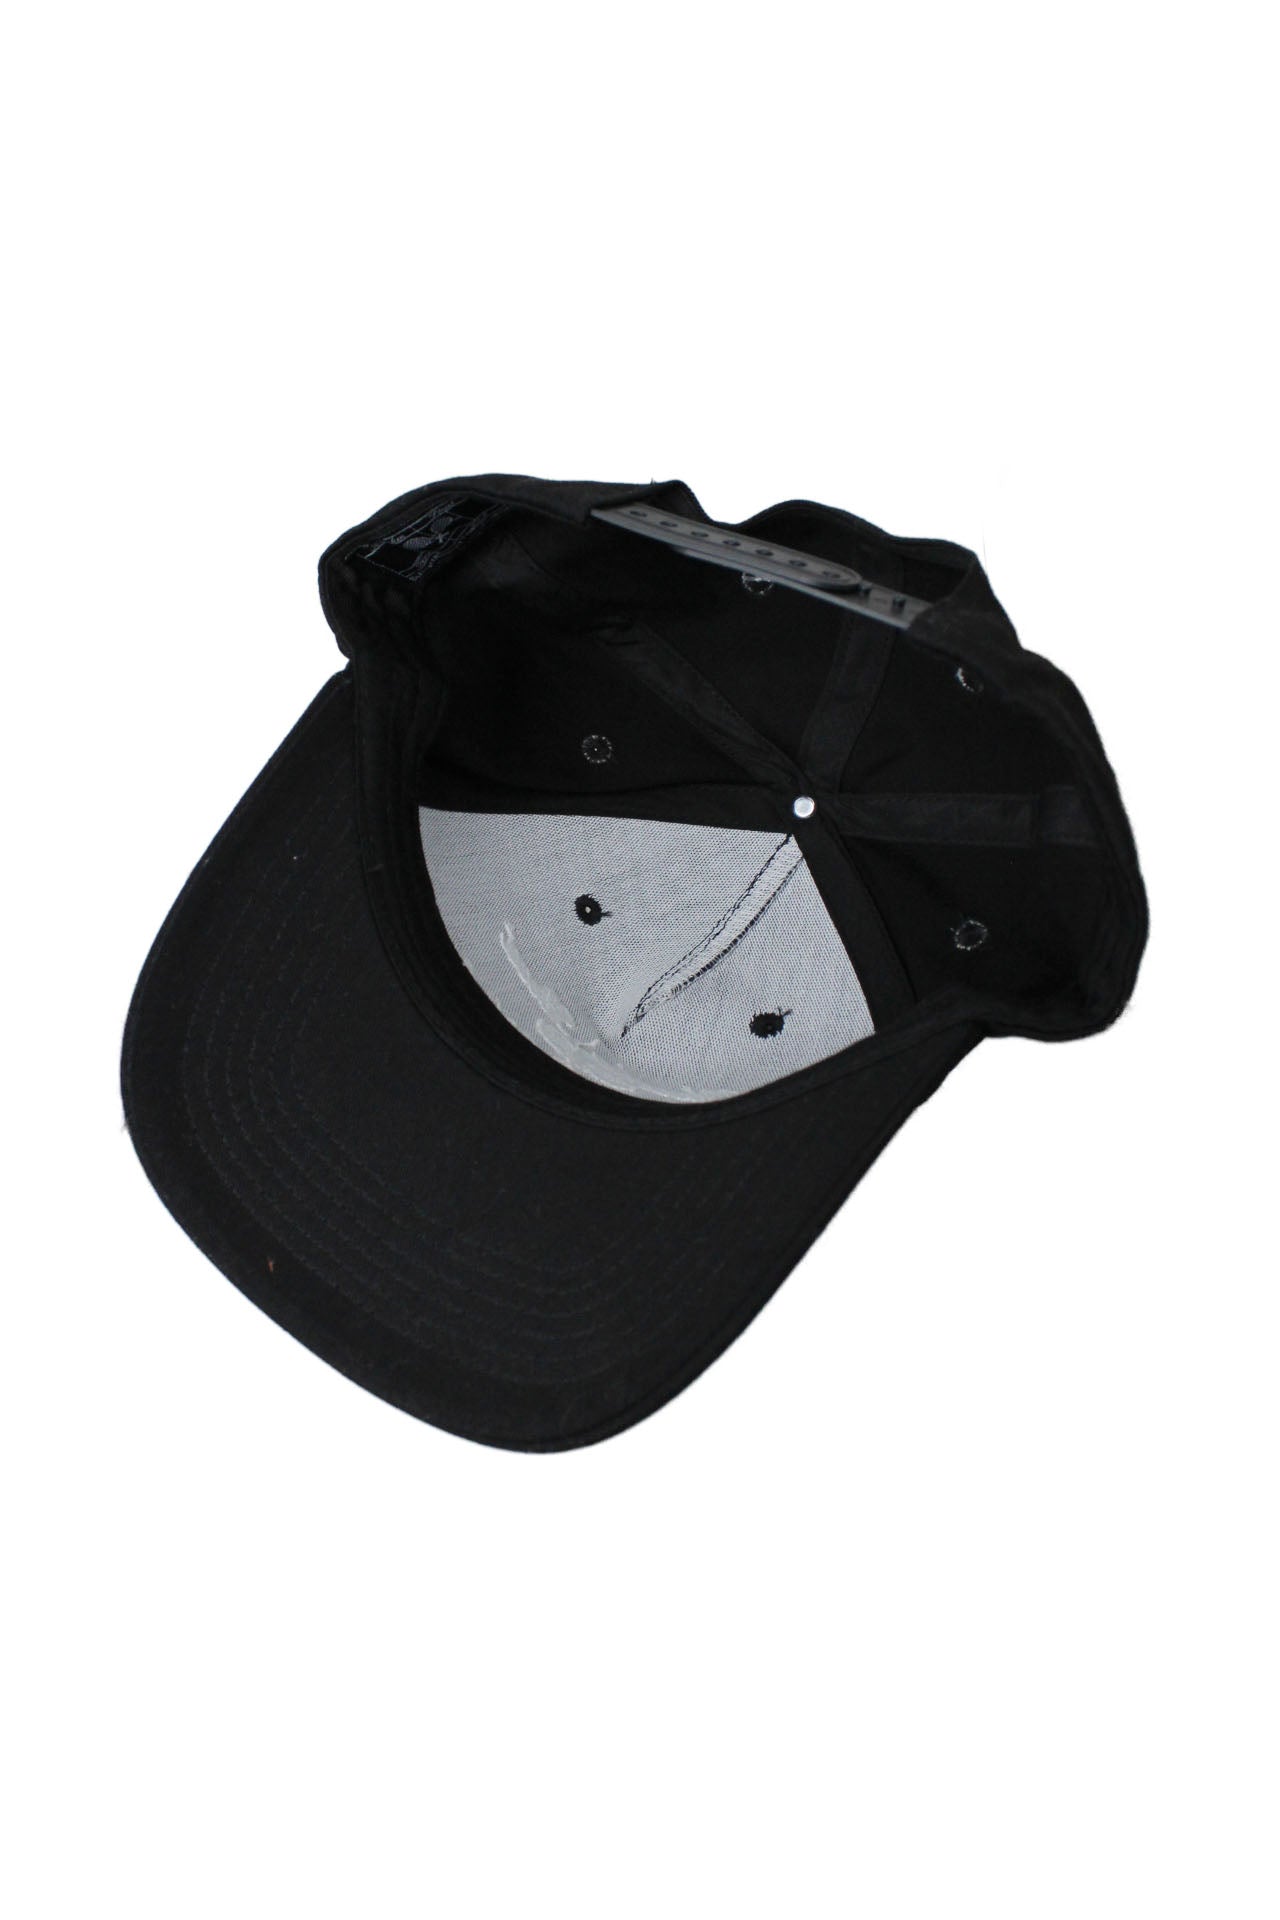 underside view with snapback closure.